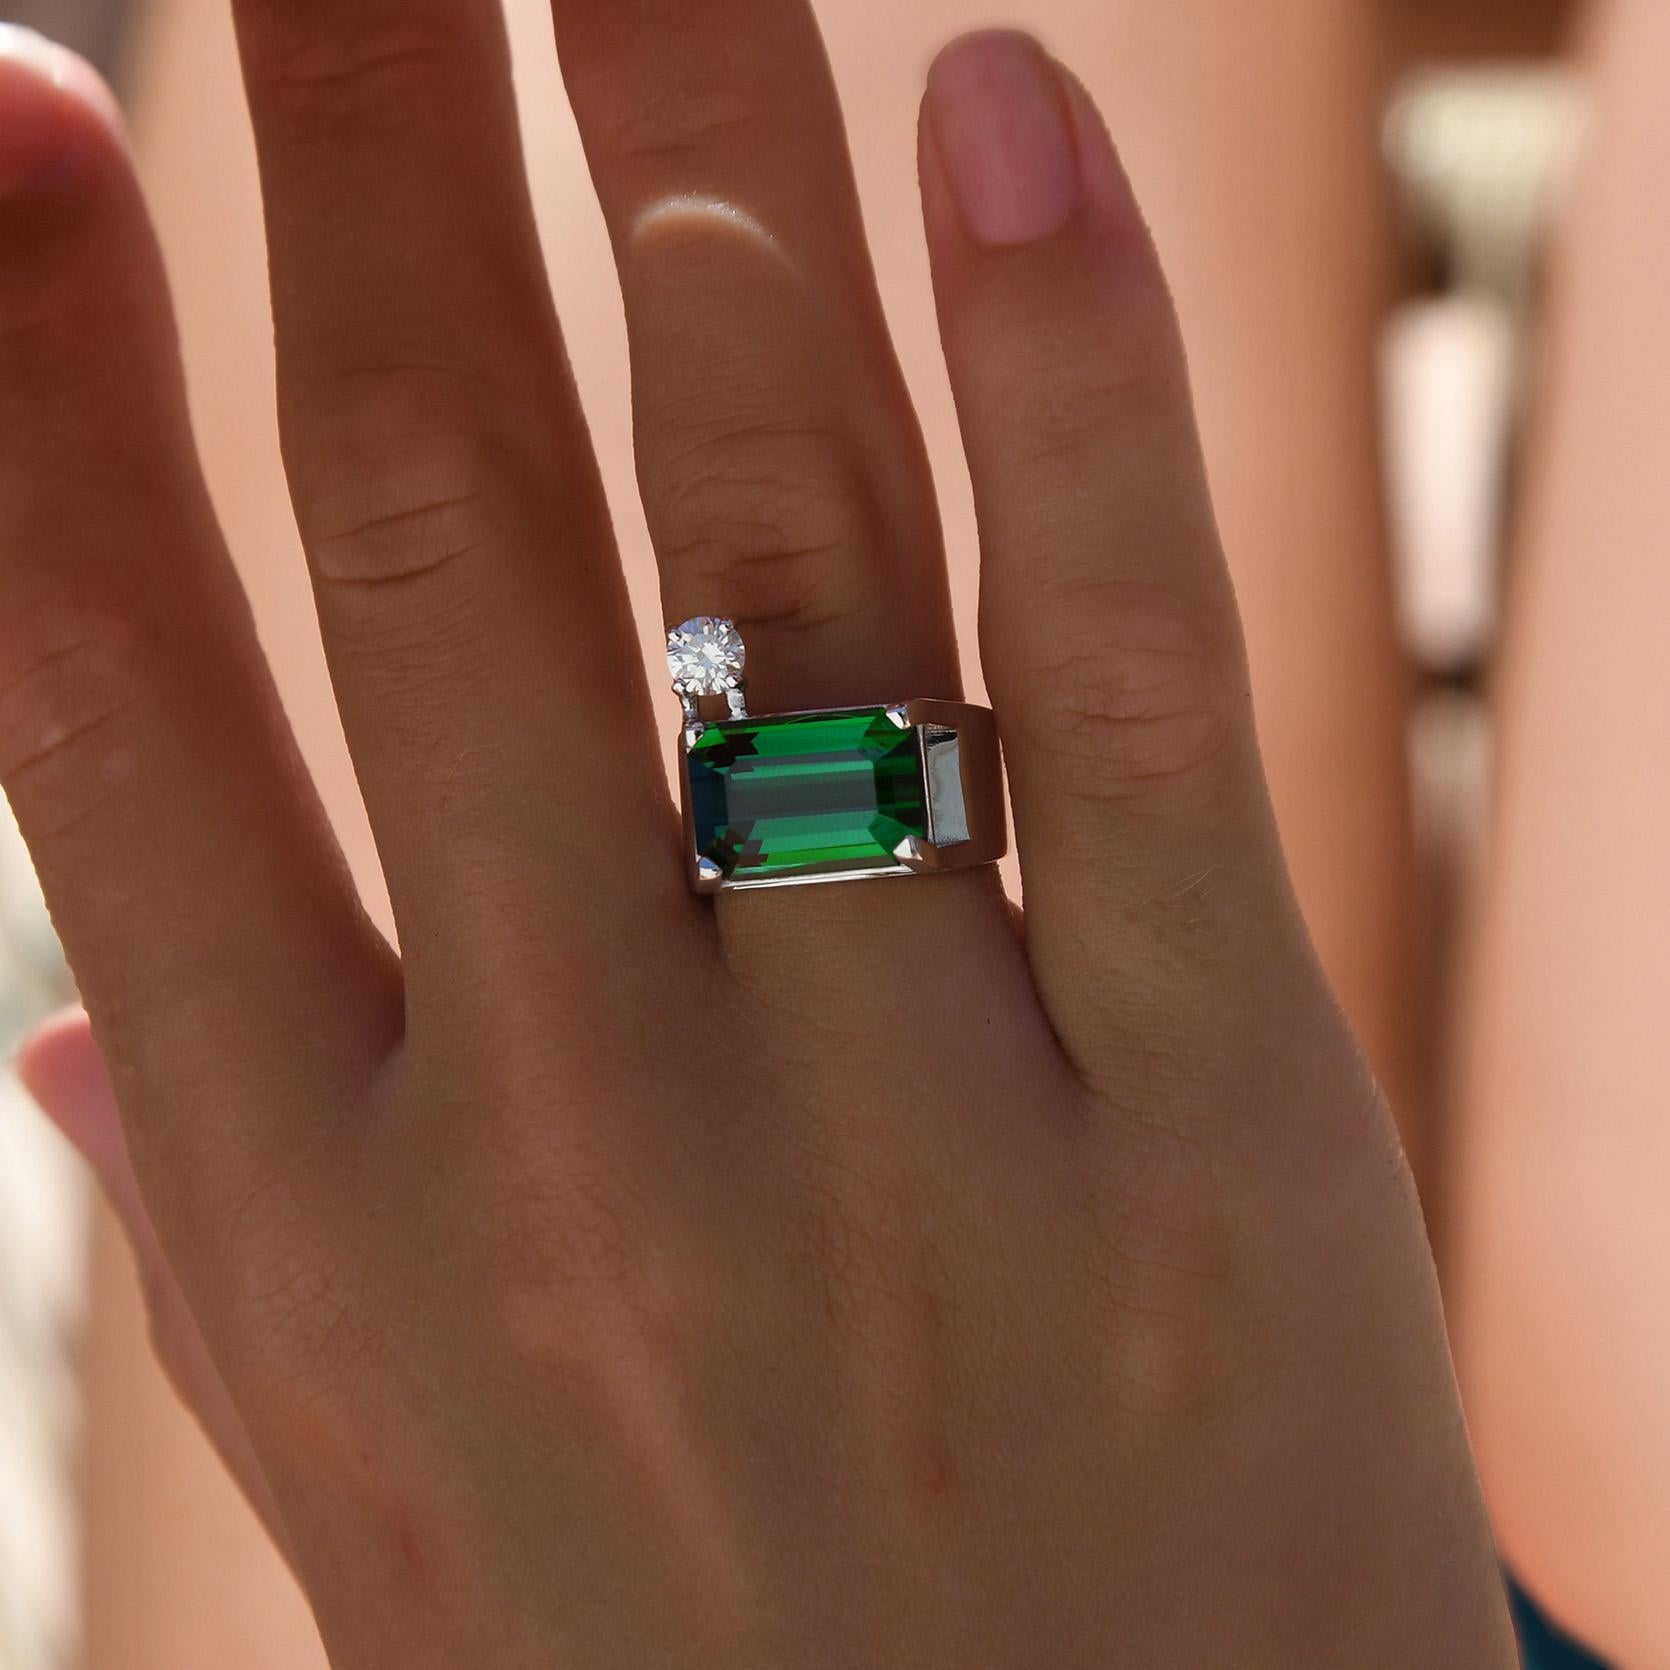 This ring by architect-designer Michel Tortel for QITTERI reveals the diamond in an innovative design where it becomes a punctuation mark, a breath of fresh air in an exceptional 8.75 carat tourmaline with blue-green tones.
The 8.75 carat